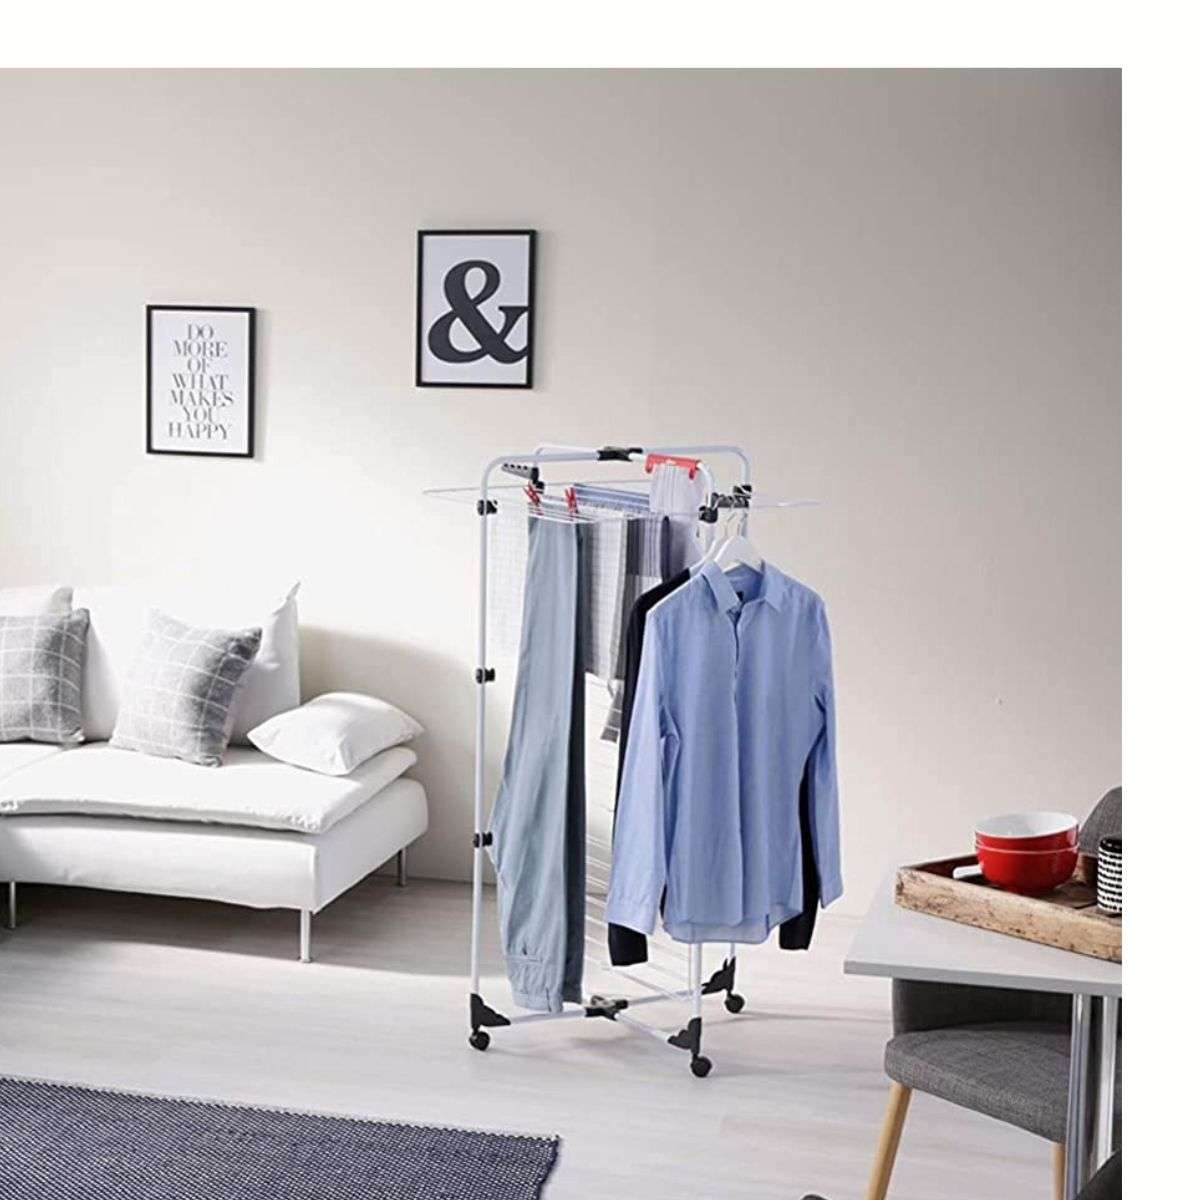 clothes hanging on an indoor tower airer in living room